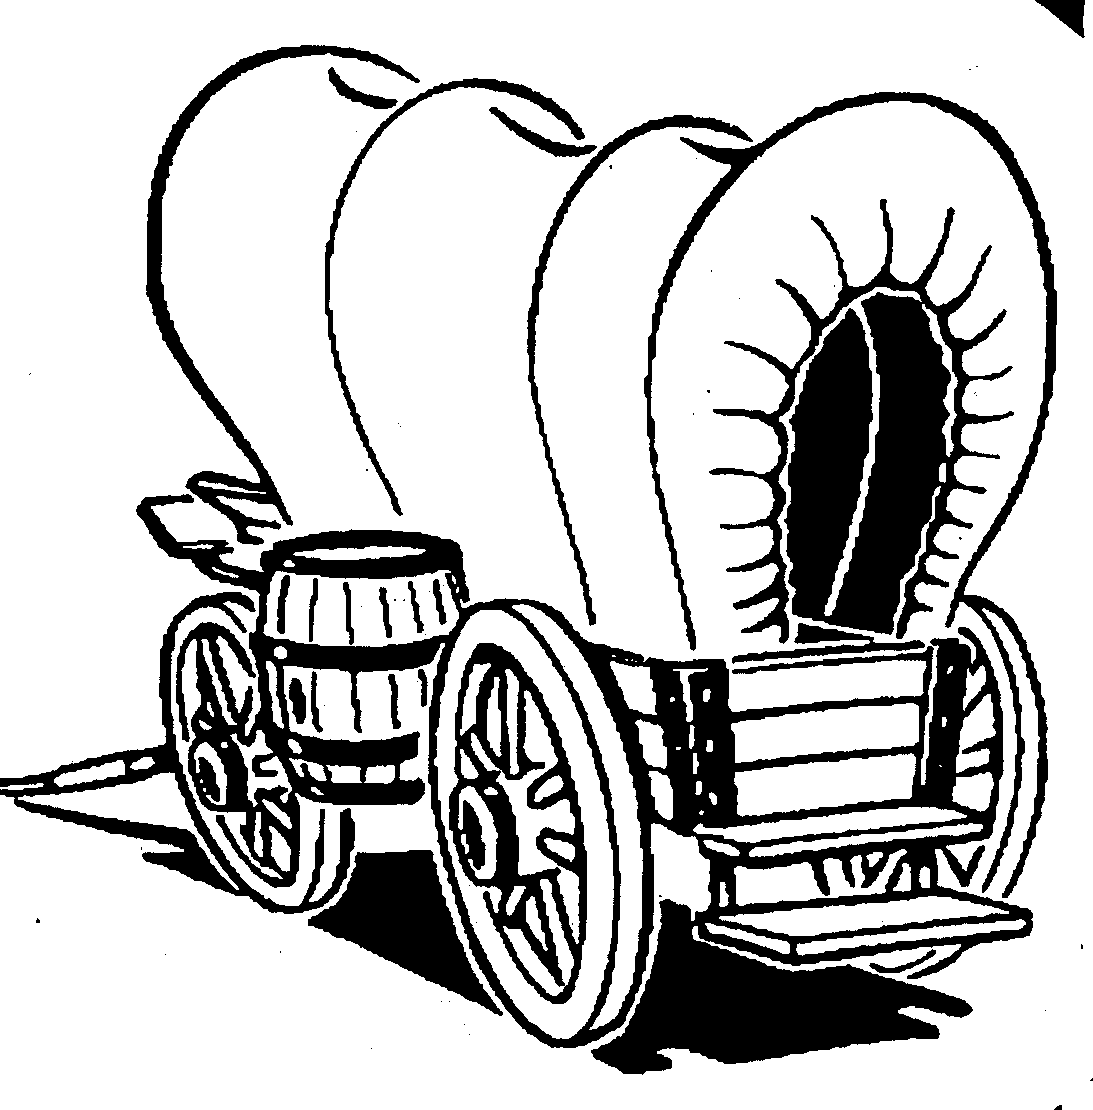 Covered wagon coloring pages - Coloring Pages & Pictures - IMAGIXS